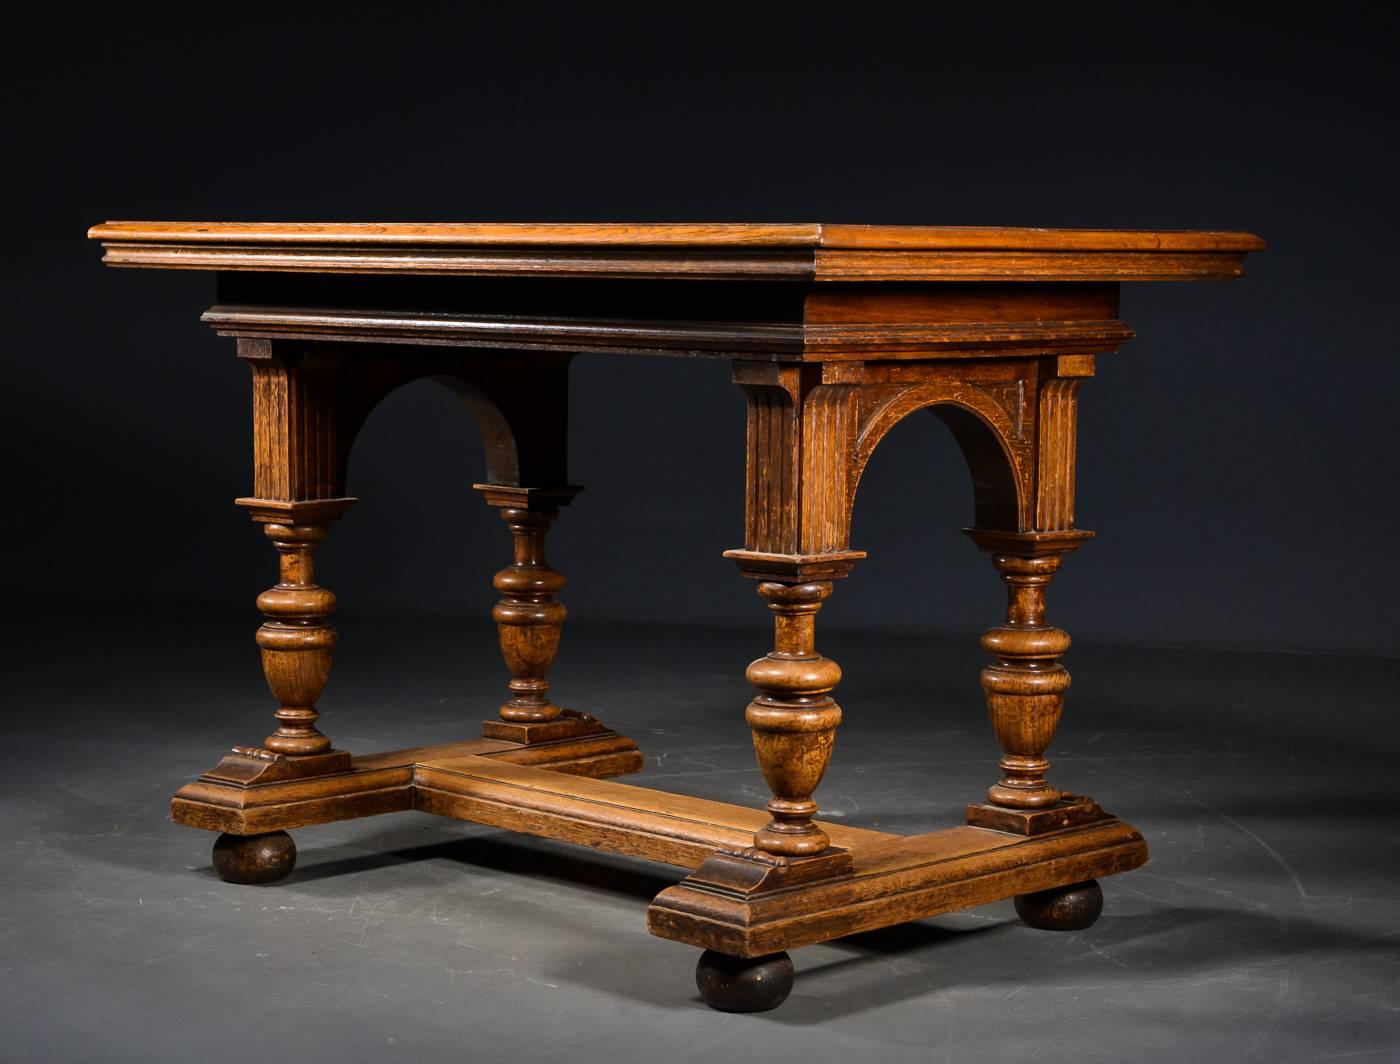 Danish late 19th century games table in the Renaissance taste. The tabletop inset with a chessboard. The top supported urn carved legs on a T-shaped molded base ending in bun feet.